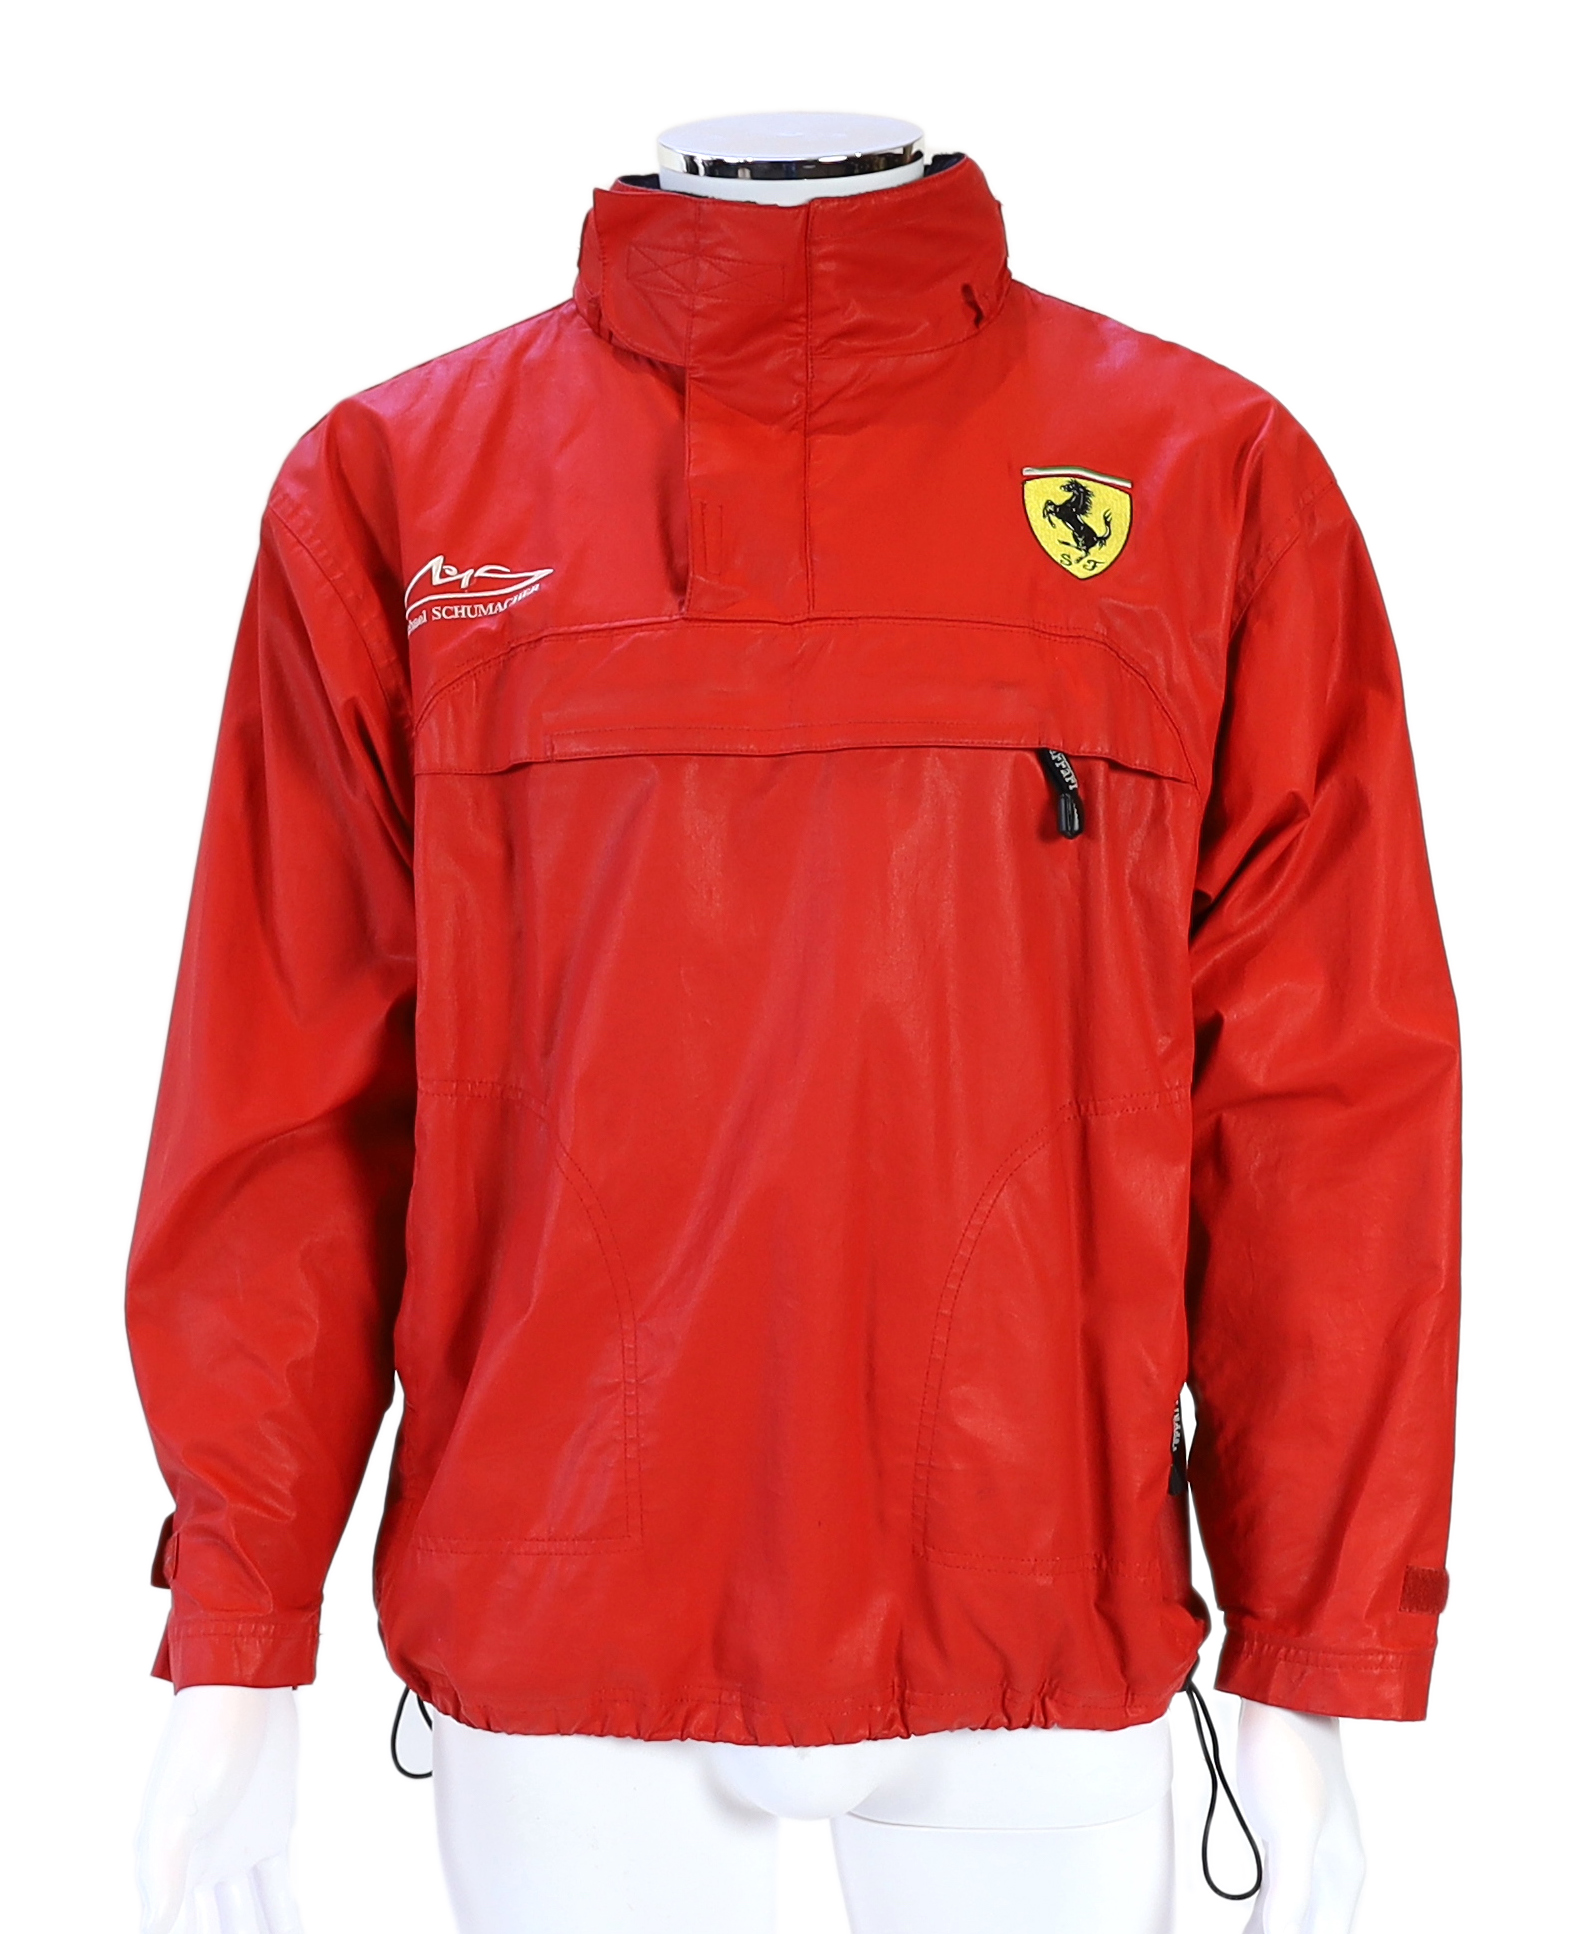 A Ferrari, Michael Schumacher red pullover jacket, size S loose fit